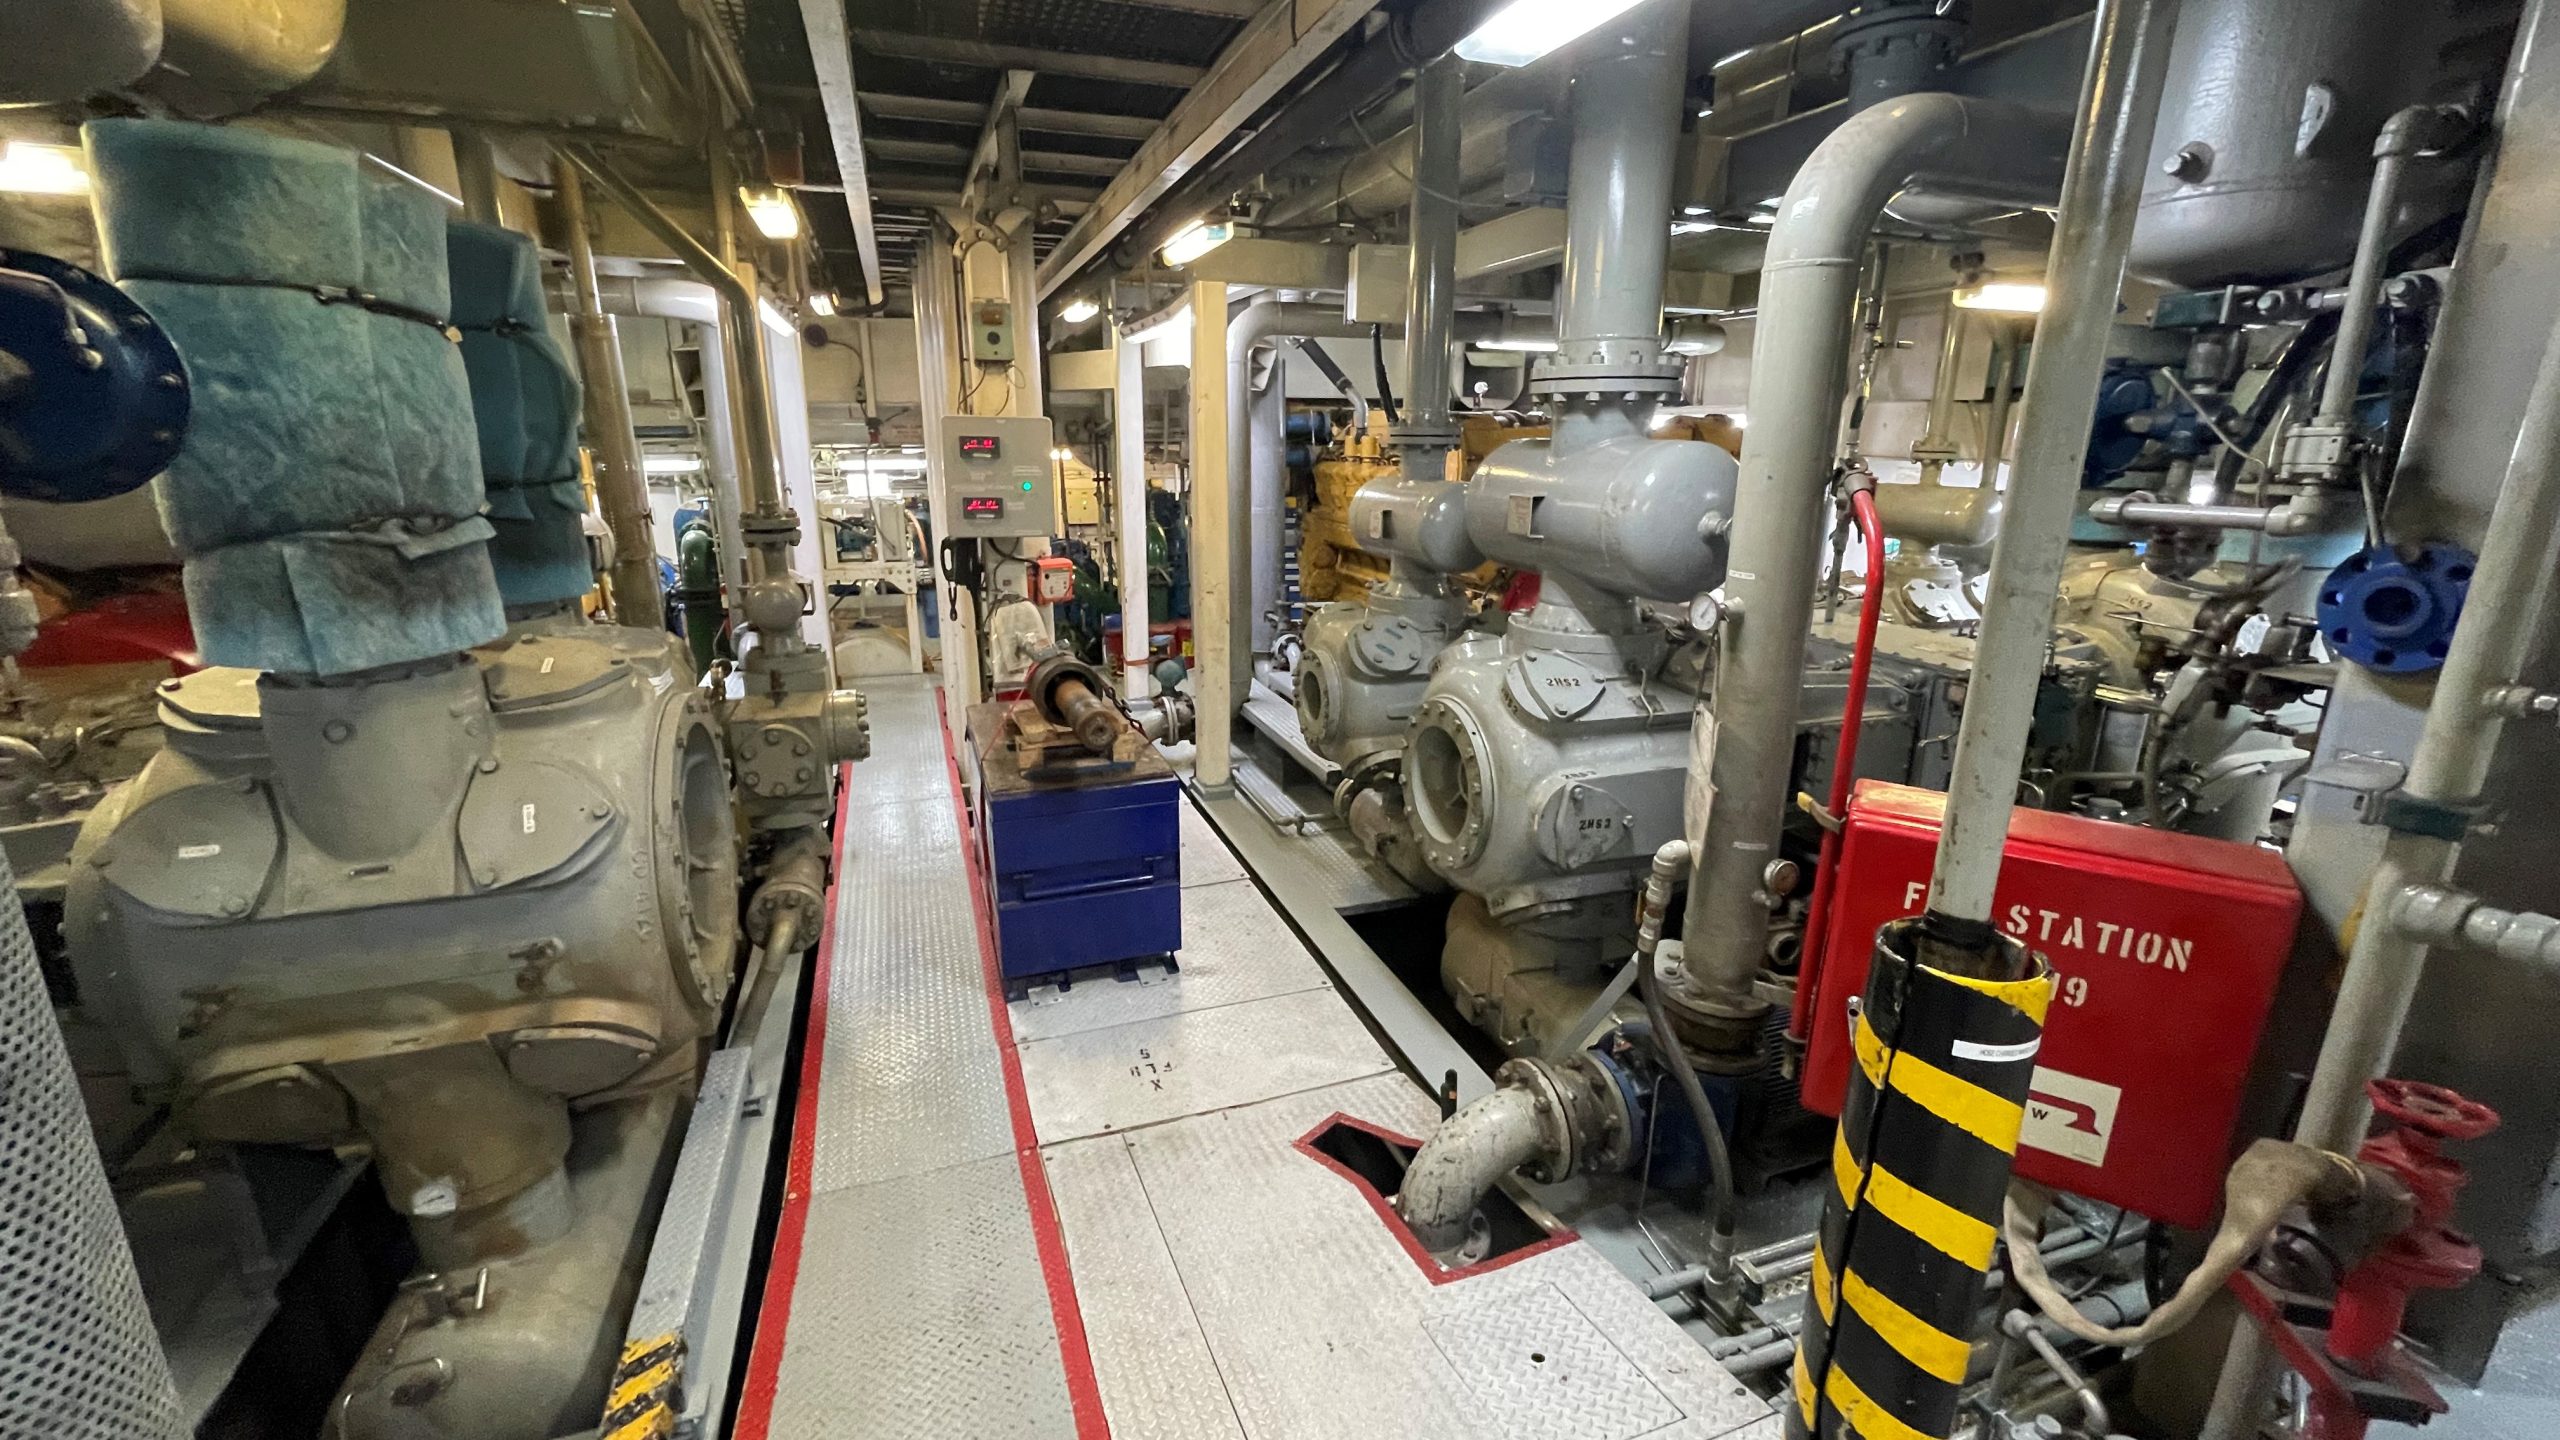 R/V Marcus G. Langseth engine room and Ariel compressors for the port side (on the left) and starboard side (on the right) of the ship. These air compressors are the largest in the world found on a research ship.]